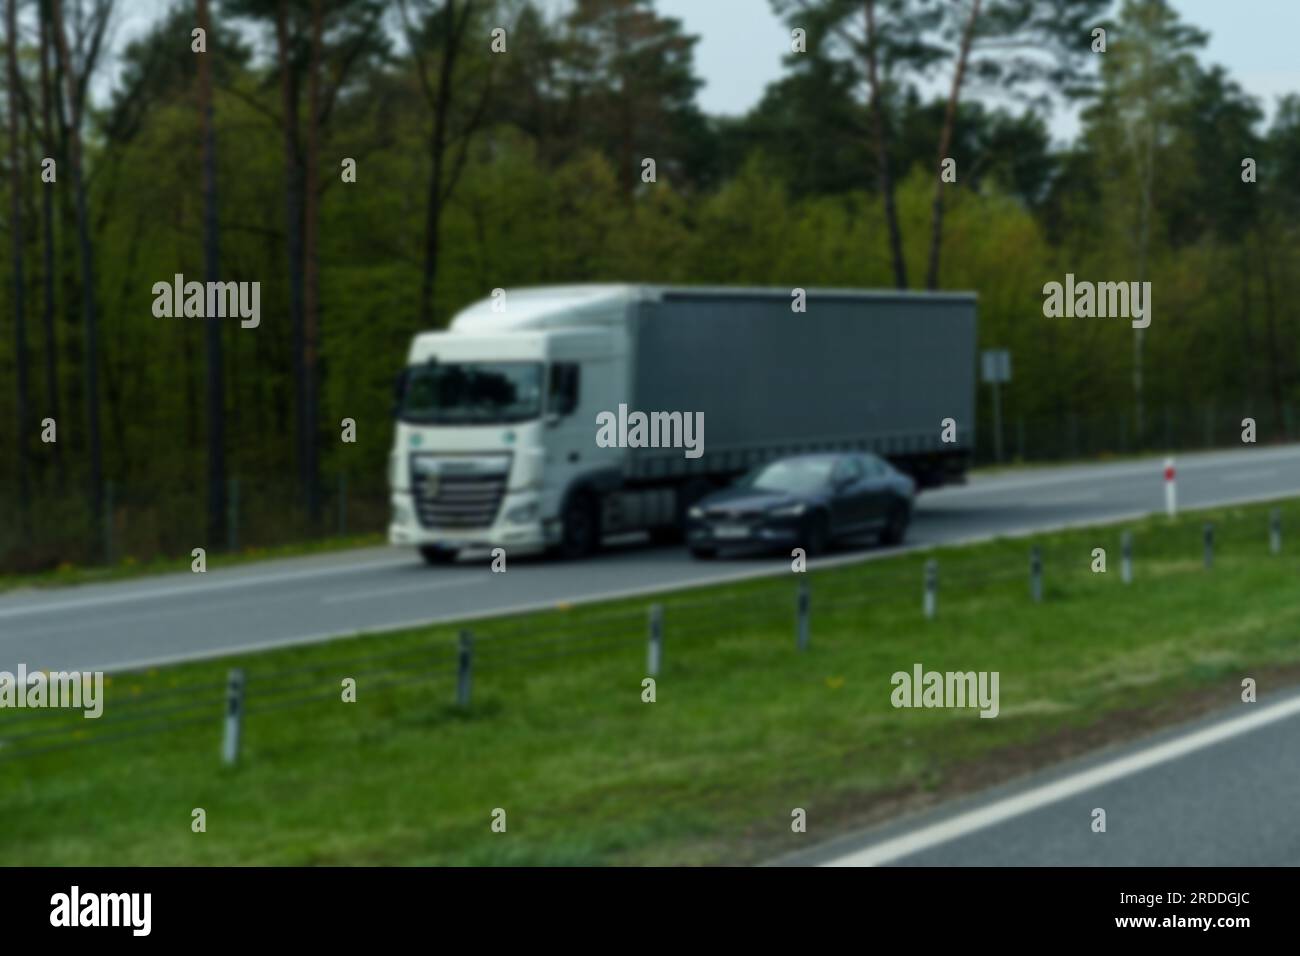 Wilczy Las, Poland - April 24, 2023: The movement of cargo transport transporting goods in tilt semi-trailers. Stock Photo